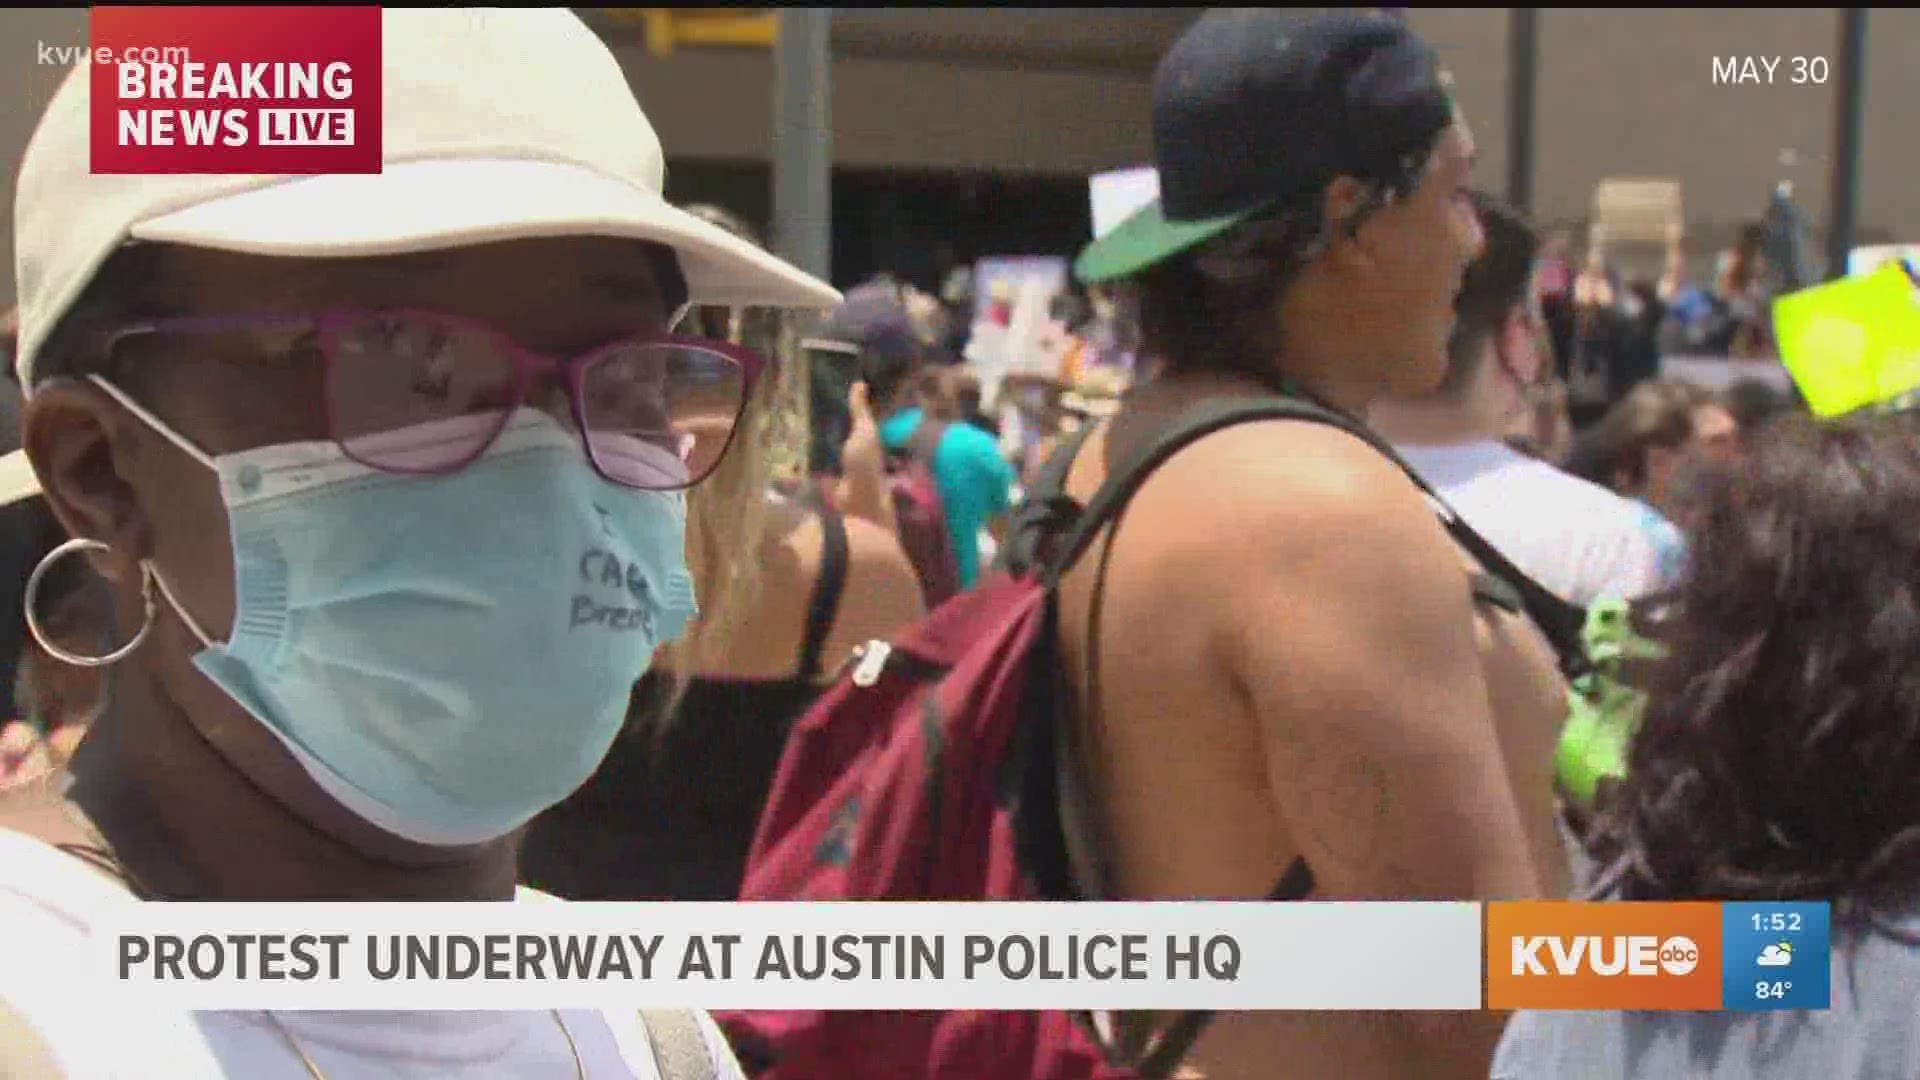 KVUE's Bryce Newberry spoke with a woman from Pflugerville who attended the protest.